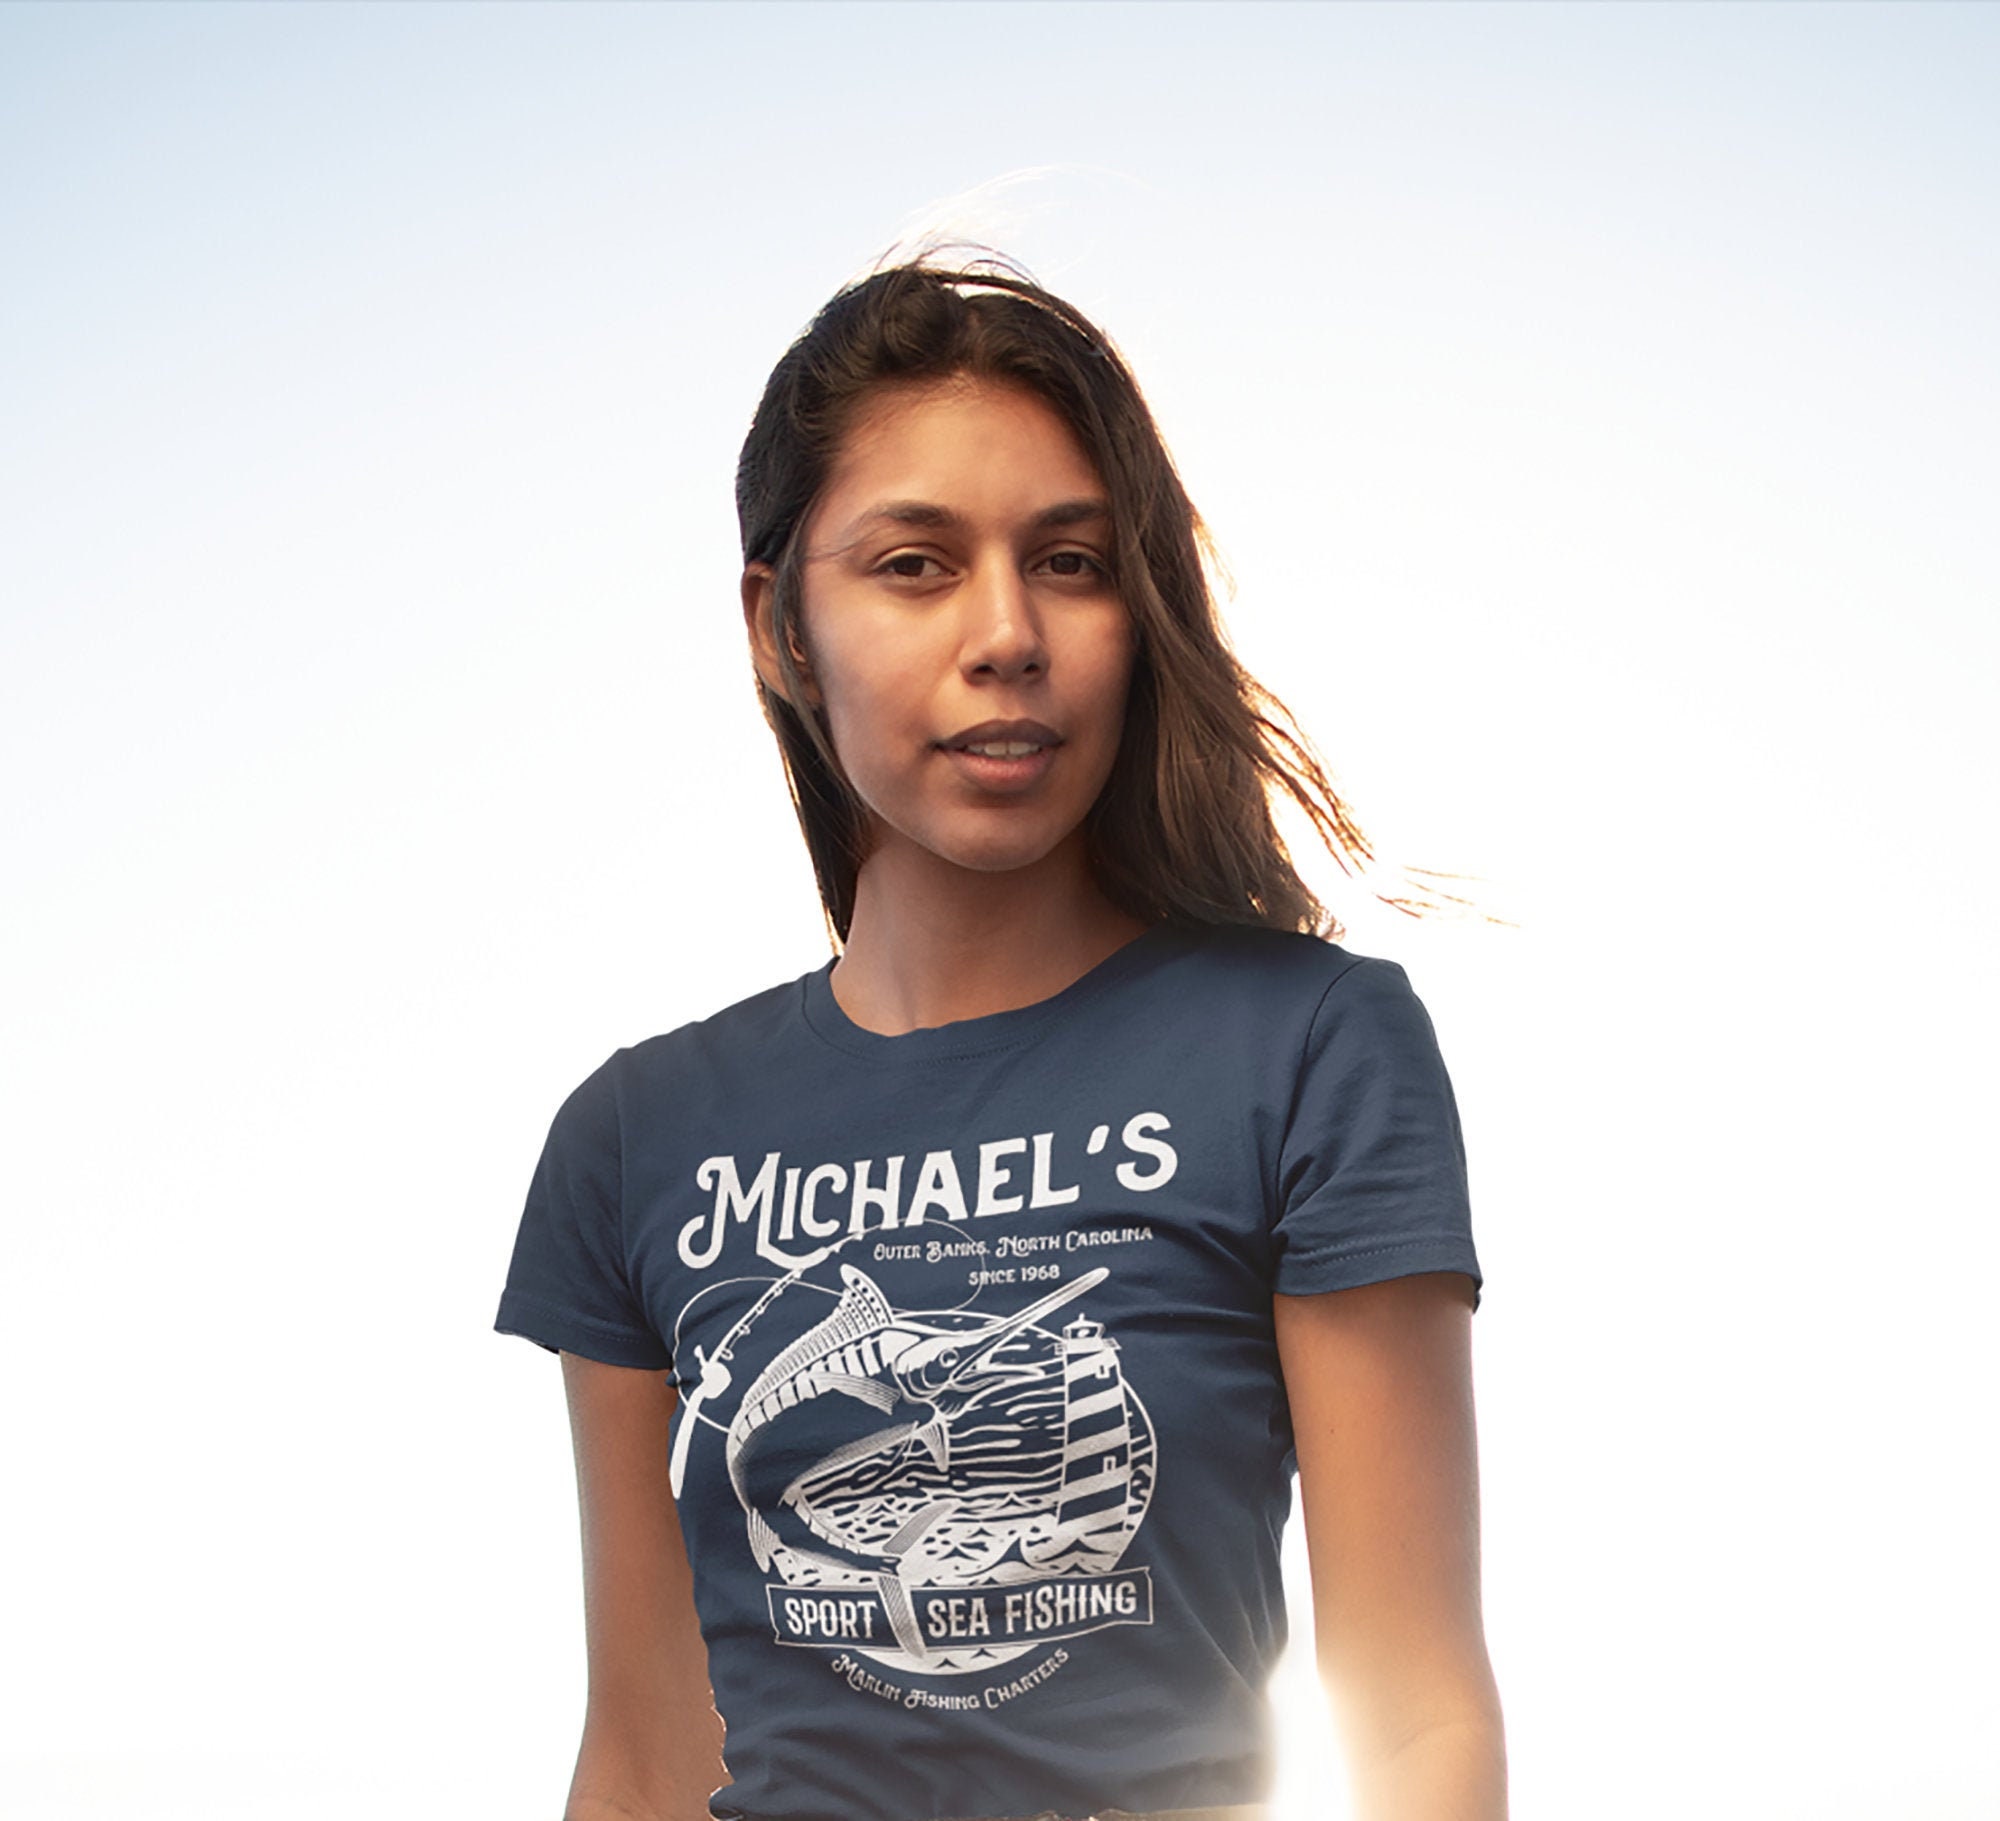 2. Why Personalized Fishing T-Shirts Make the Perfect Gift for Your Girlfriend